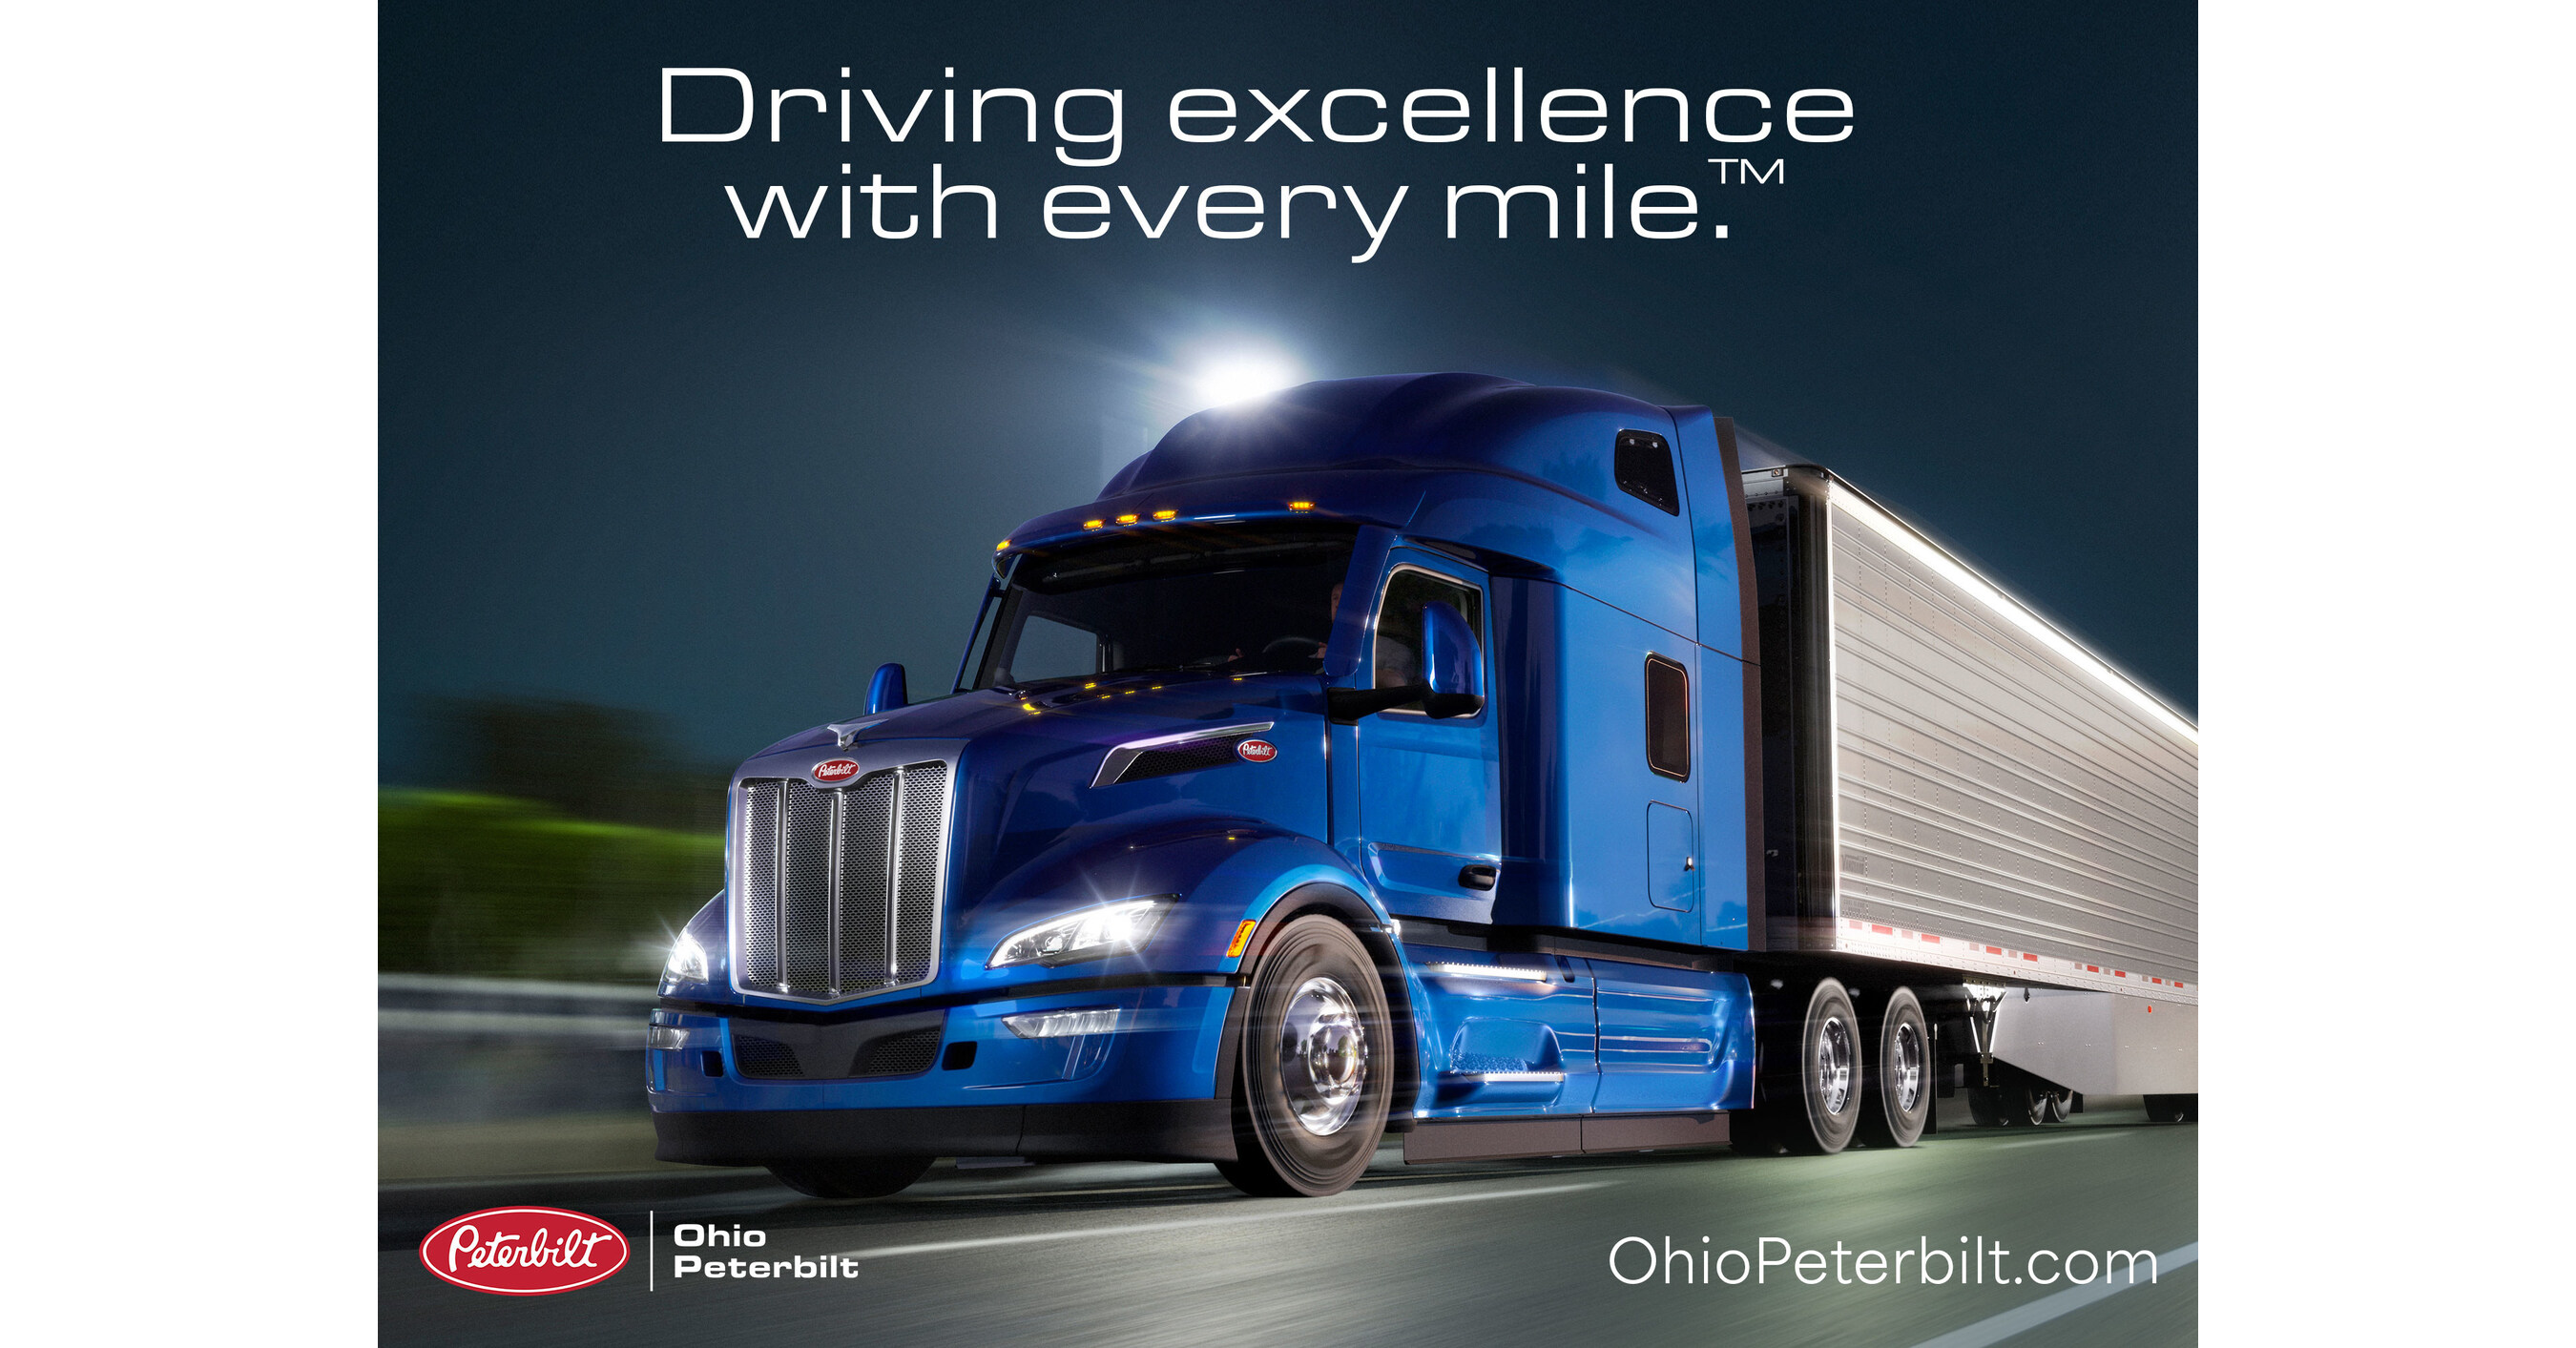 Ohio Peterbilt Launches “Driving Excellence with Every Mile” Campaign